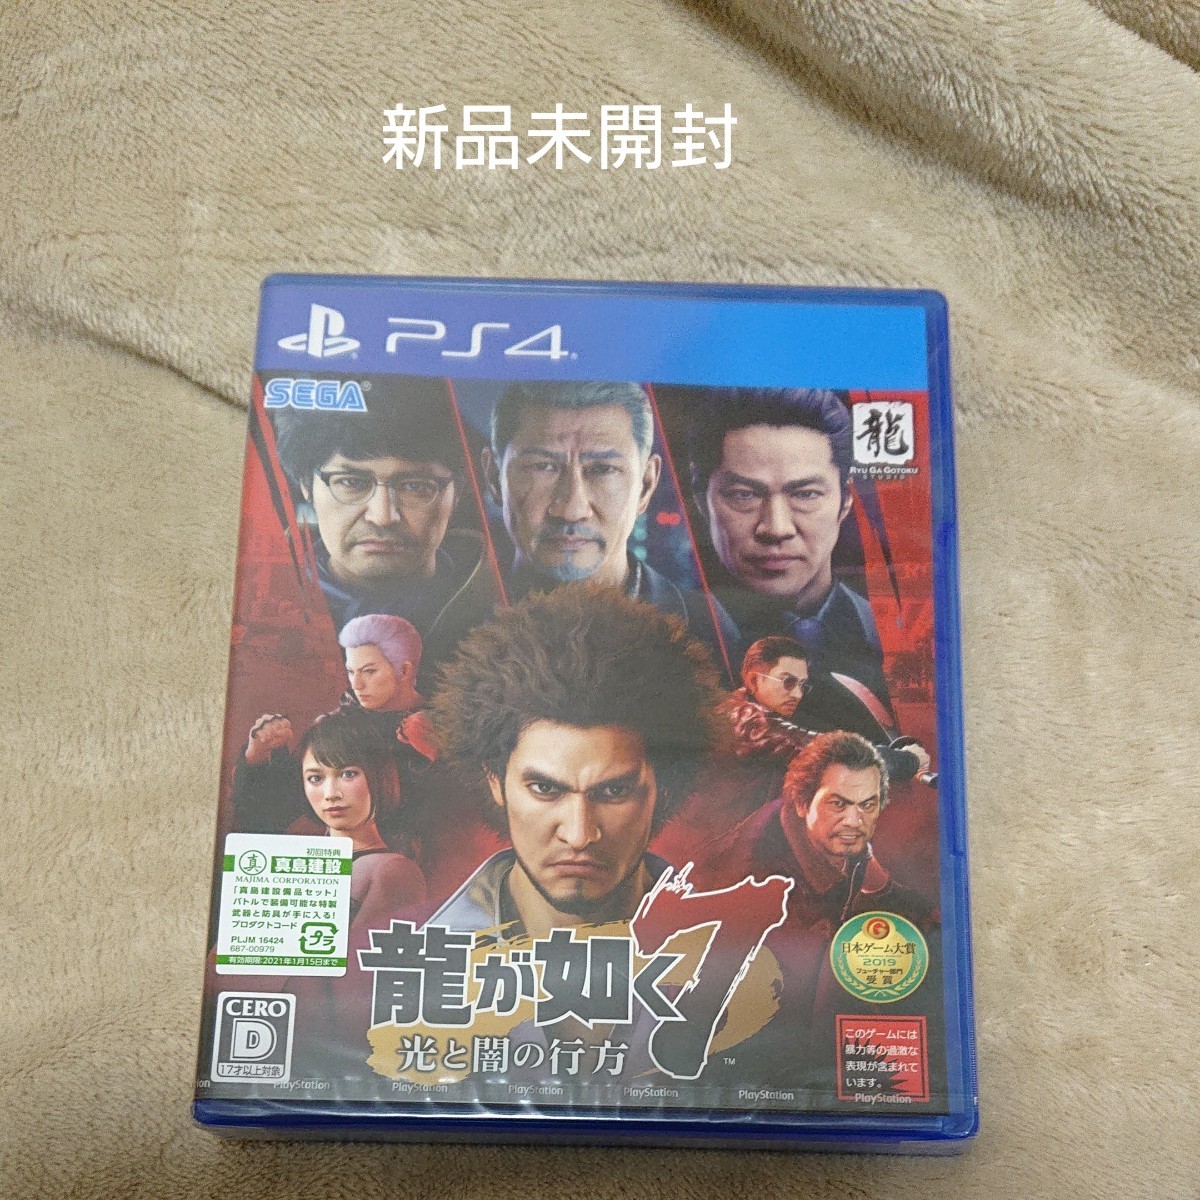 PS4 龍が如く7